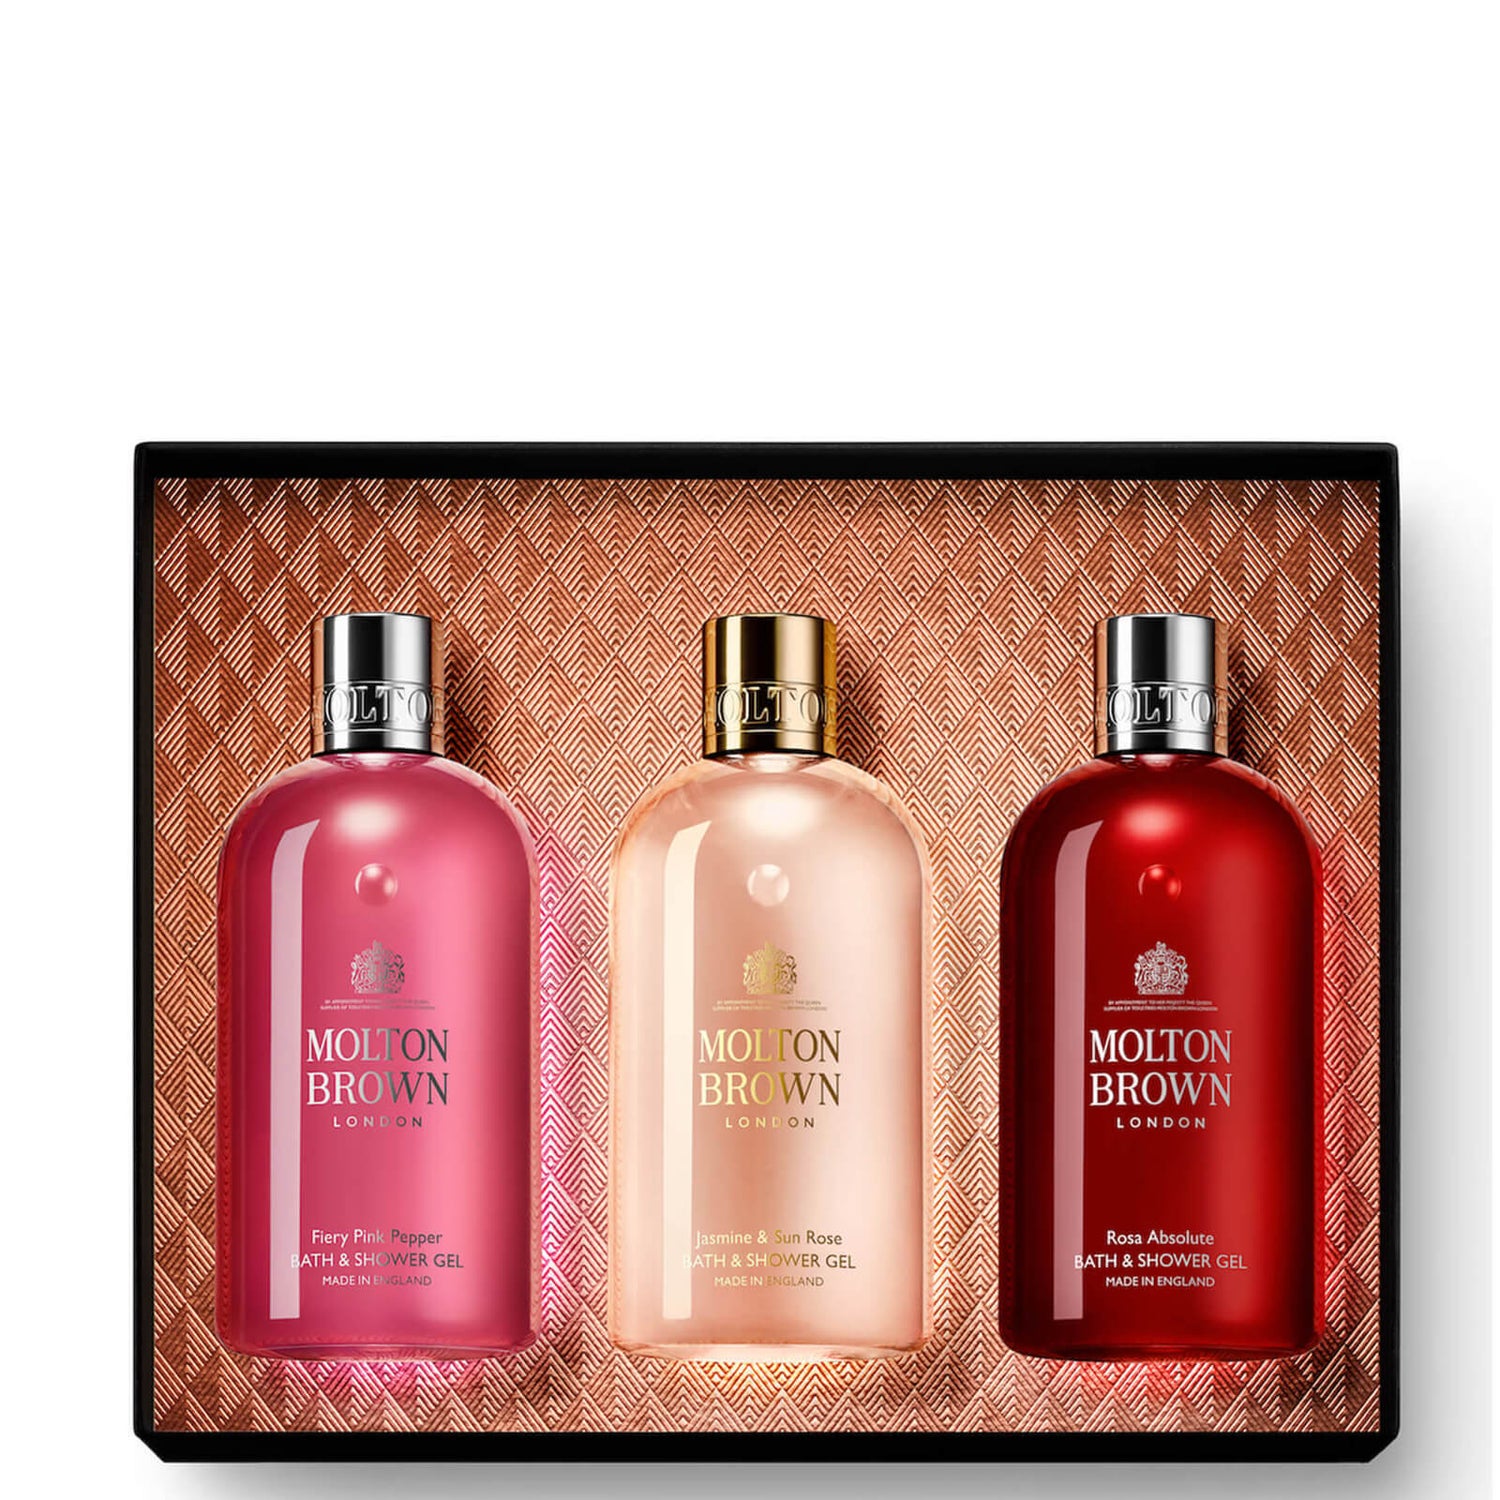 Molton Brown Floral and Chypre Gift Set (Worth $120.00)